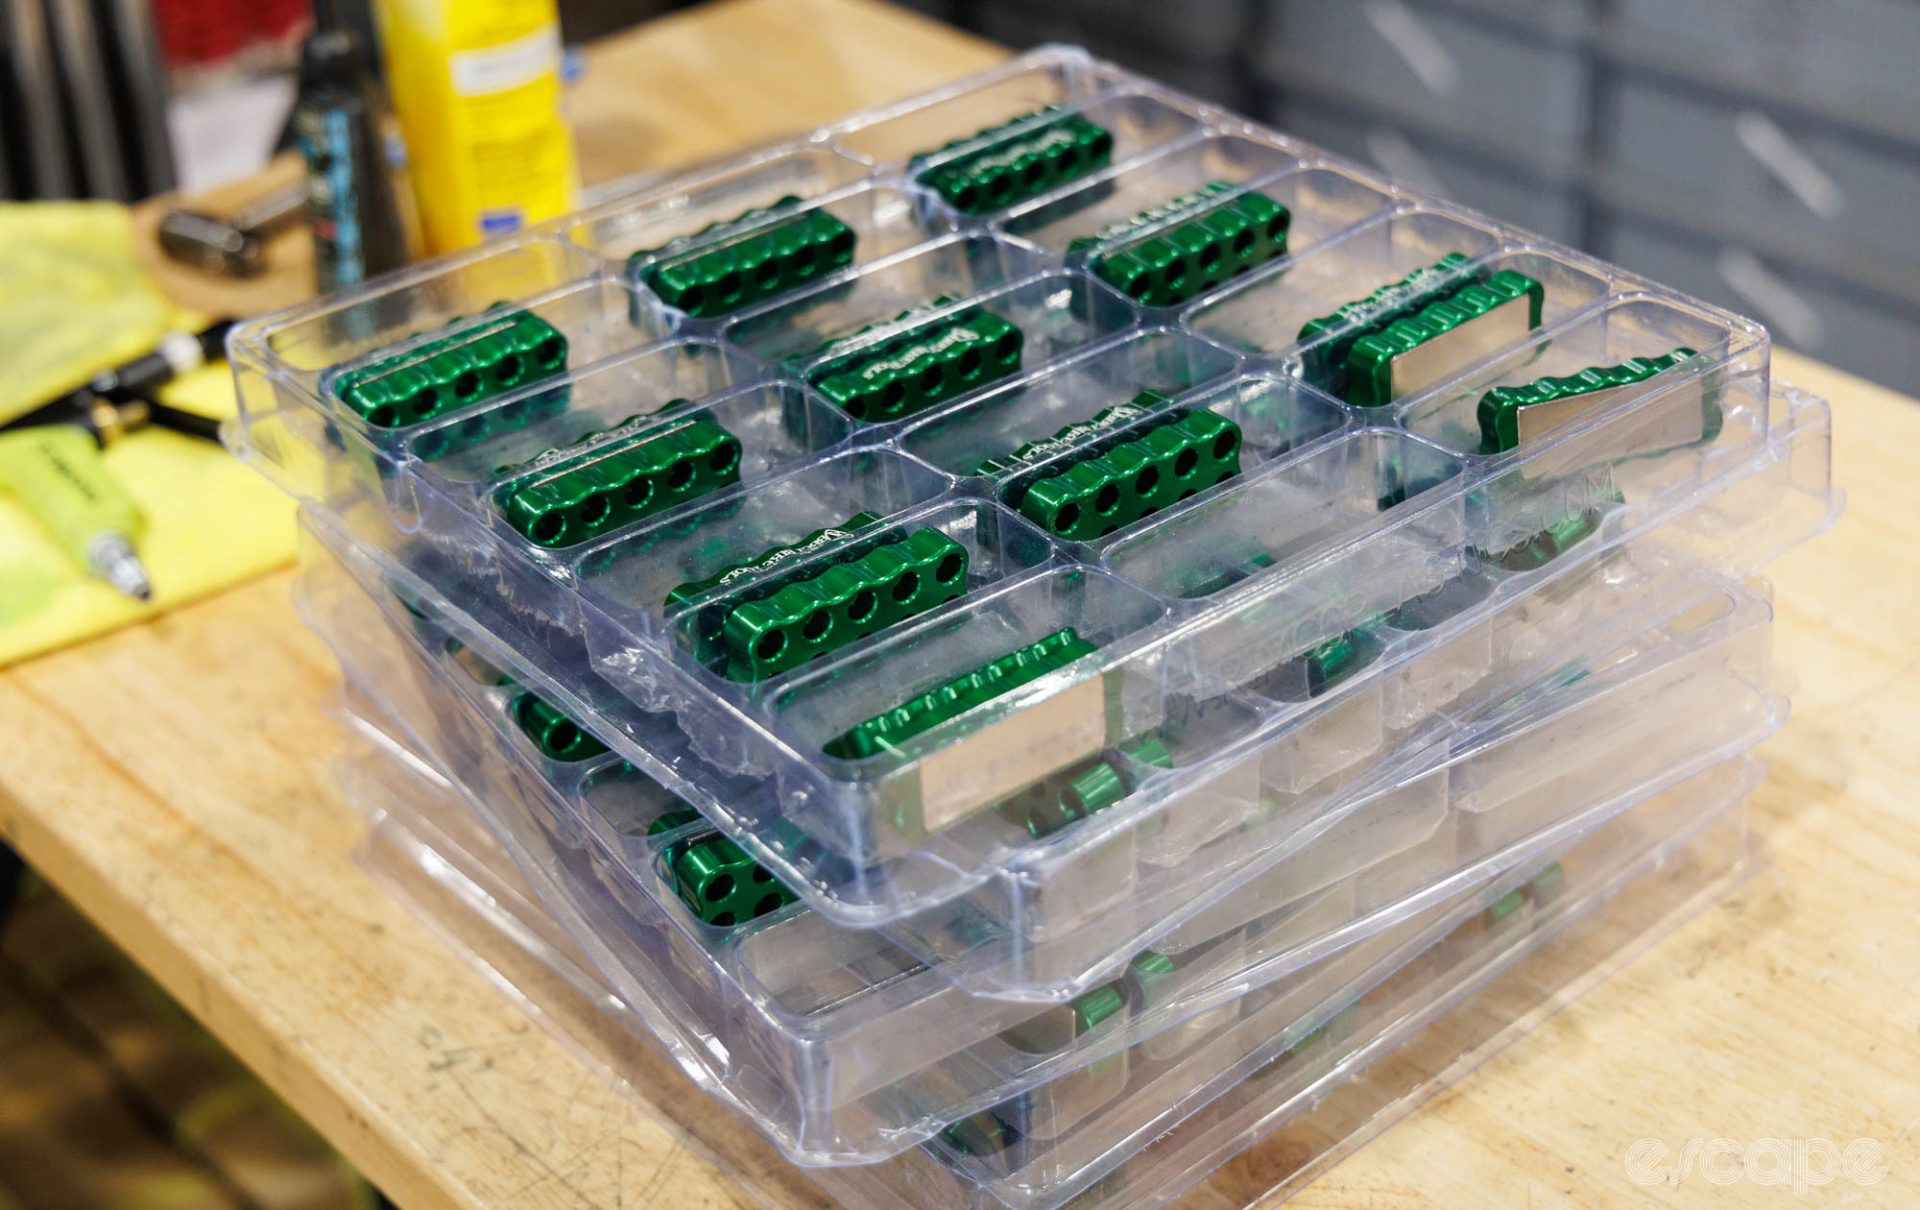 Trays of magnetic bit holders in bright green sit on a bench.